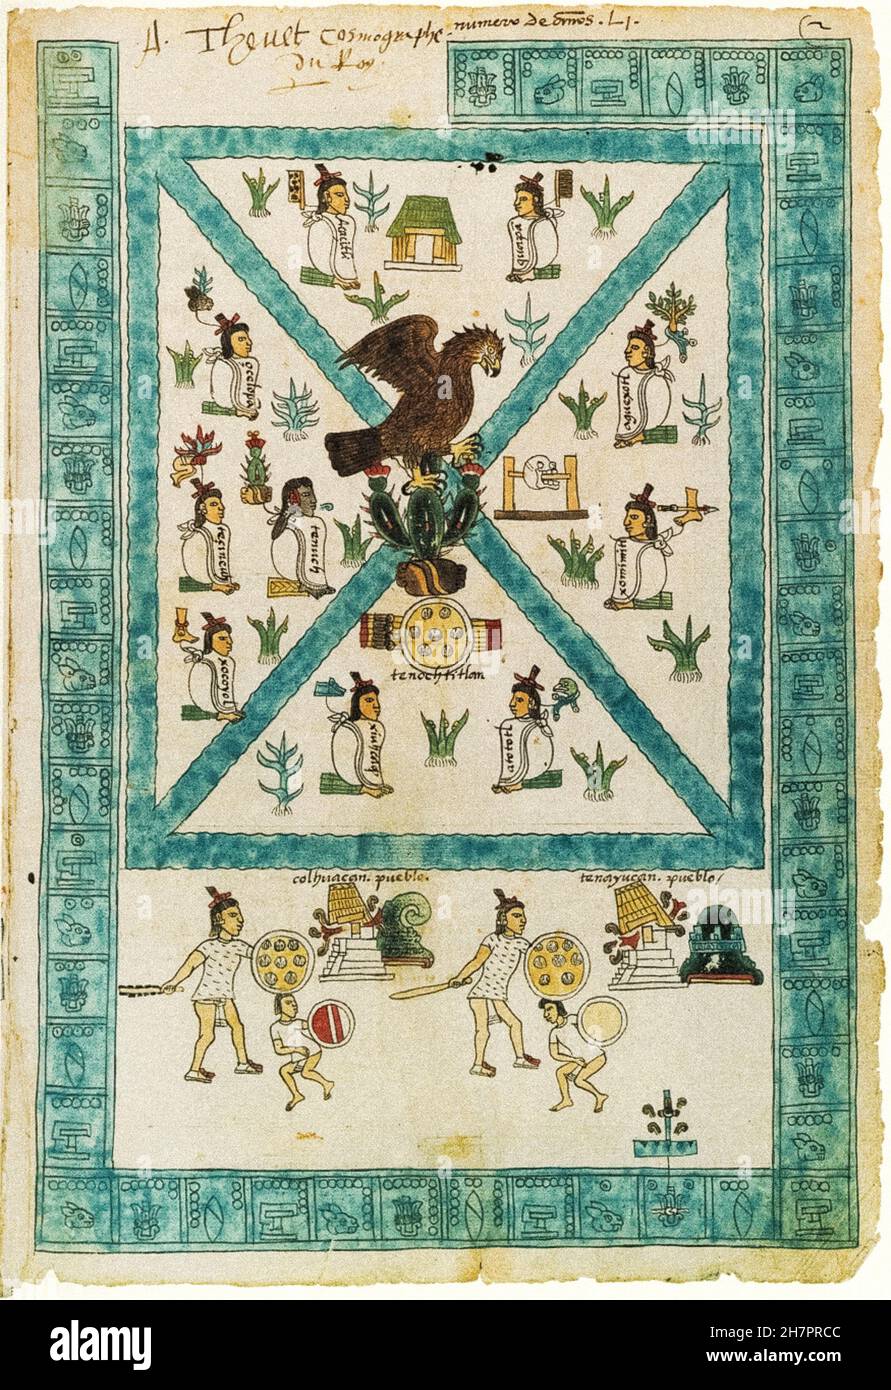 Codex Mendoza 1540 - In the center the glyph of Tenochtitlán and around the glyphs of the Aztec emperors Stock Photo